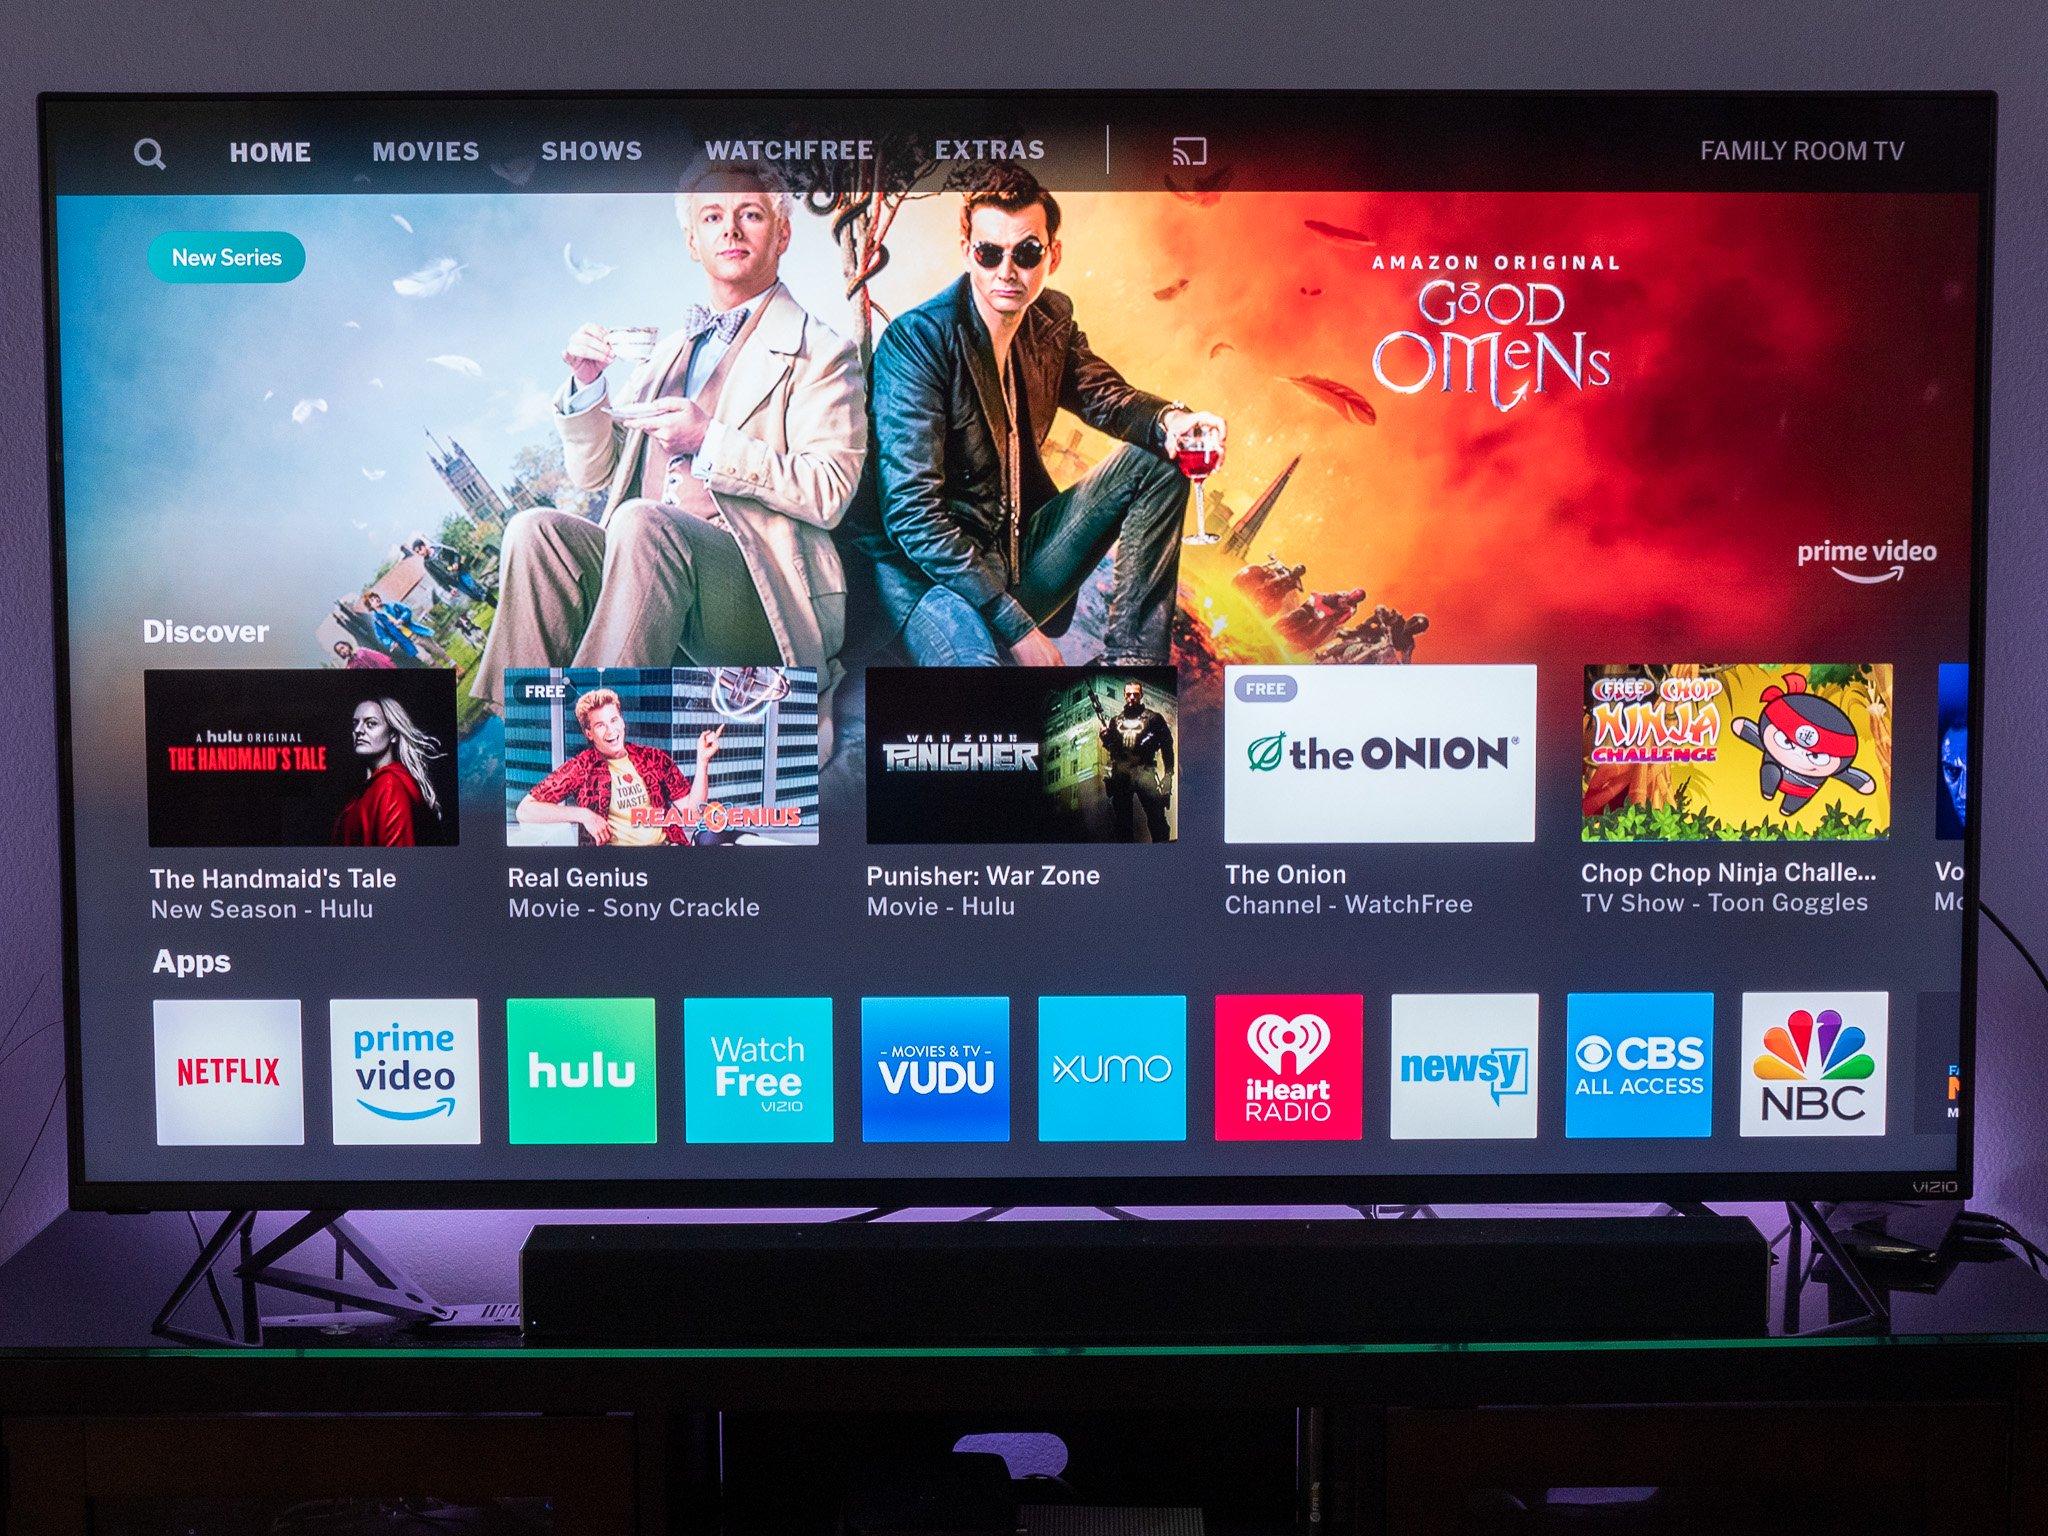 Step-by-Step Guide: How to Update and Install Apps on Your Vizio TV